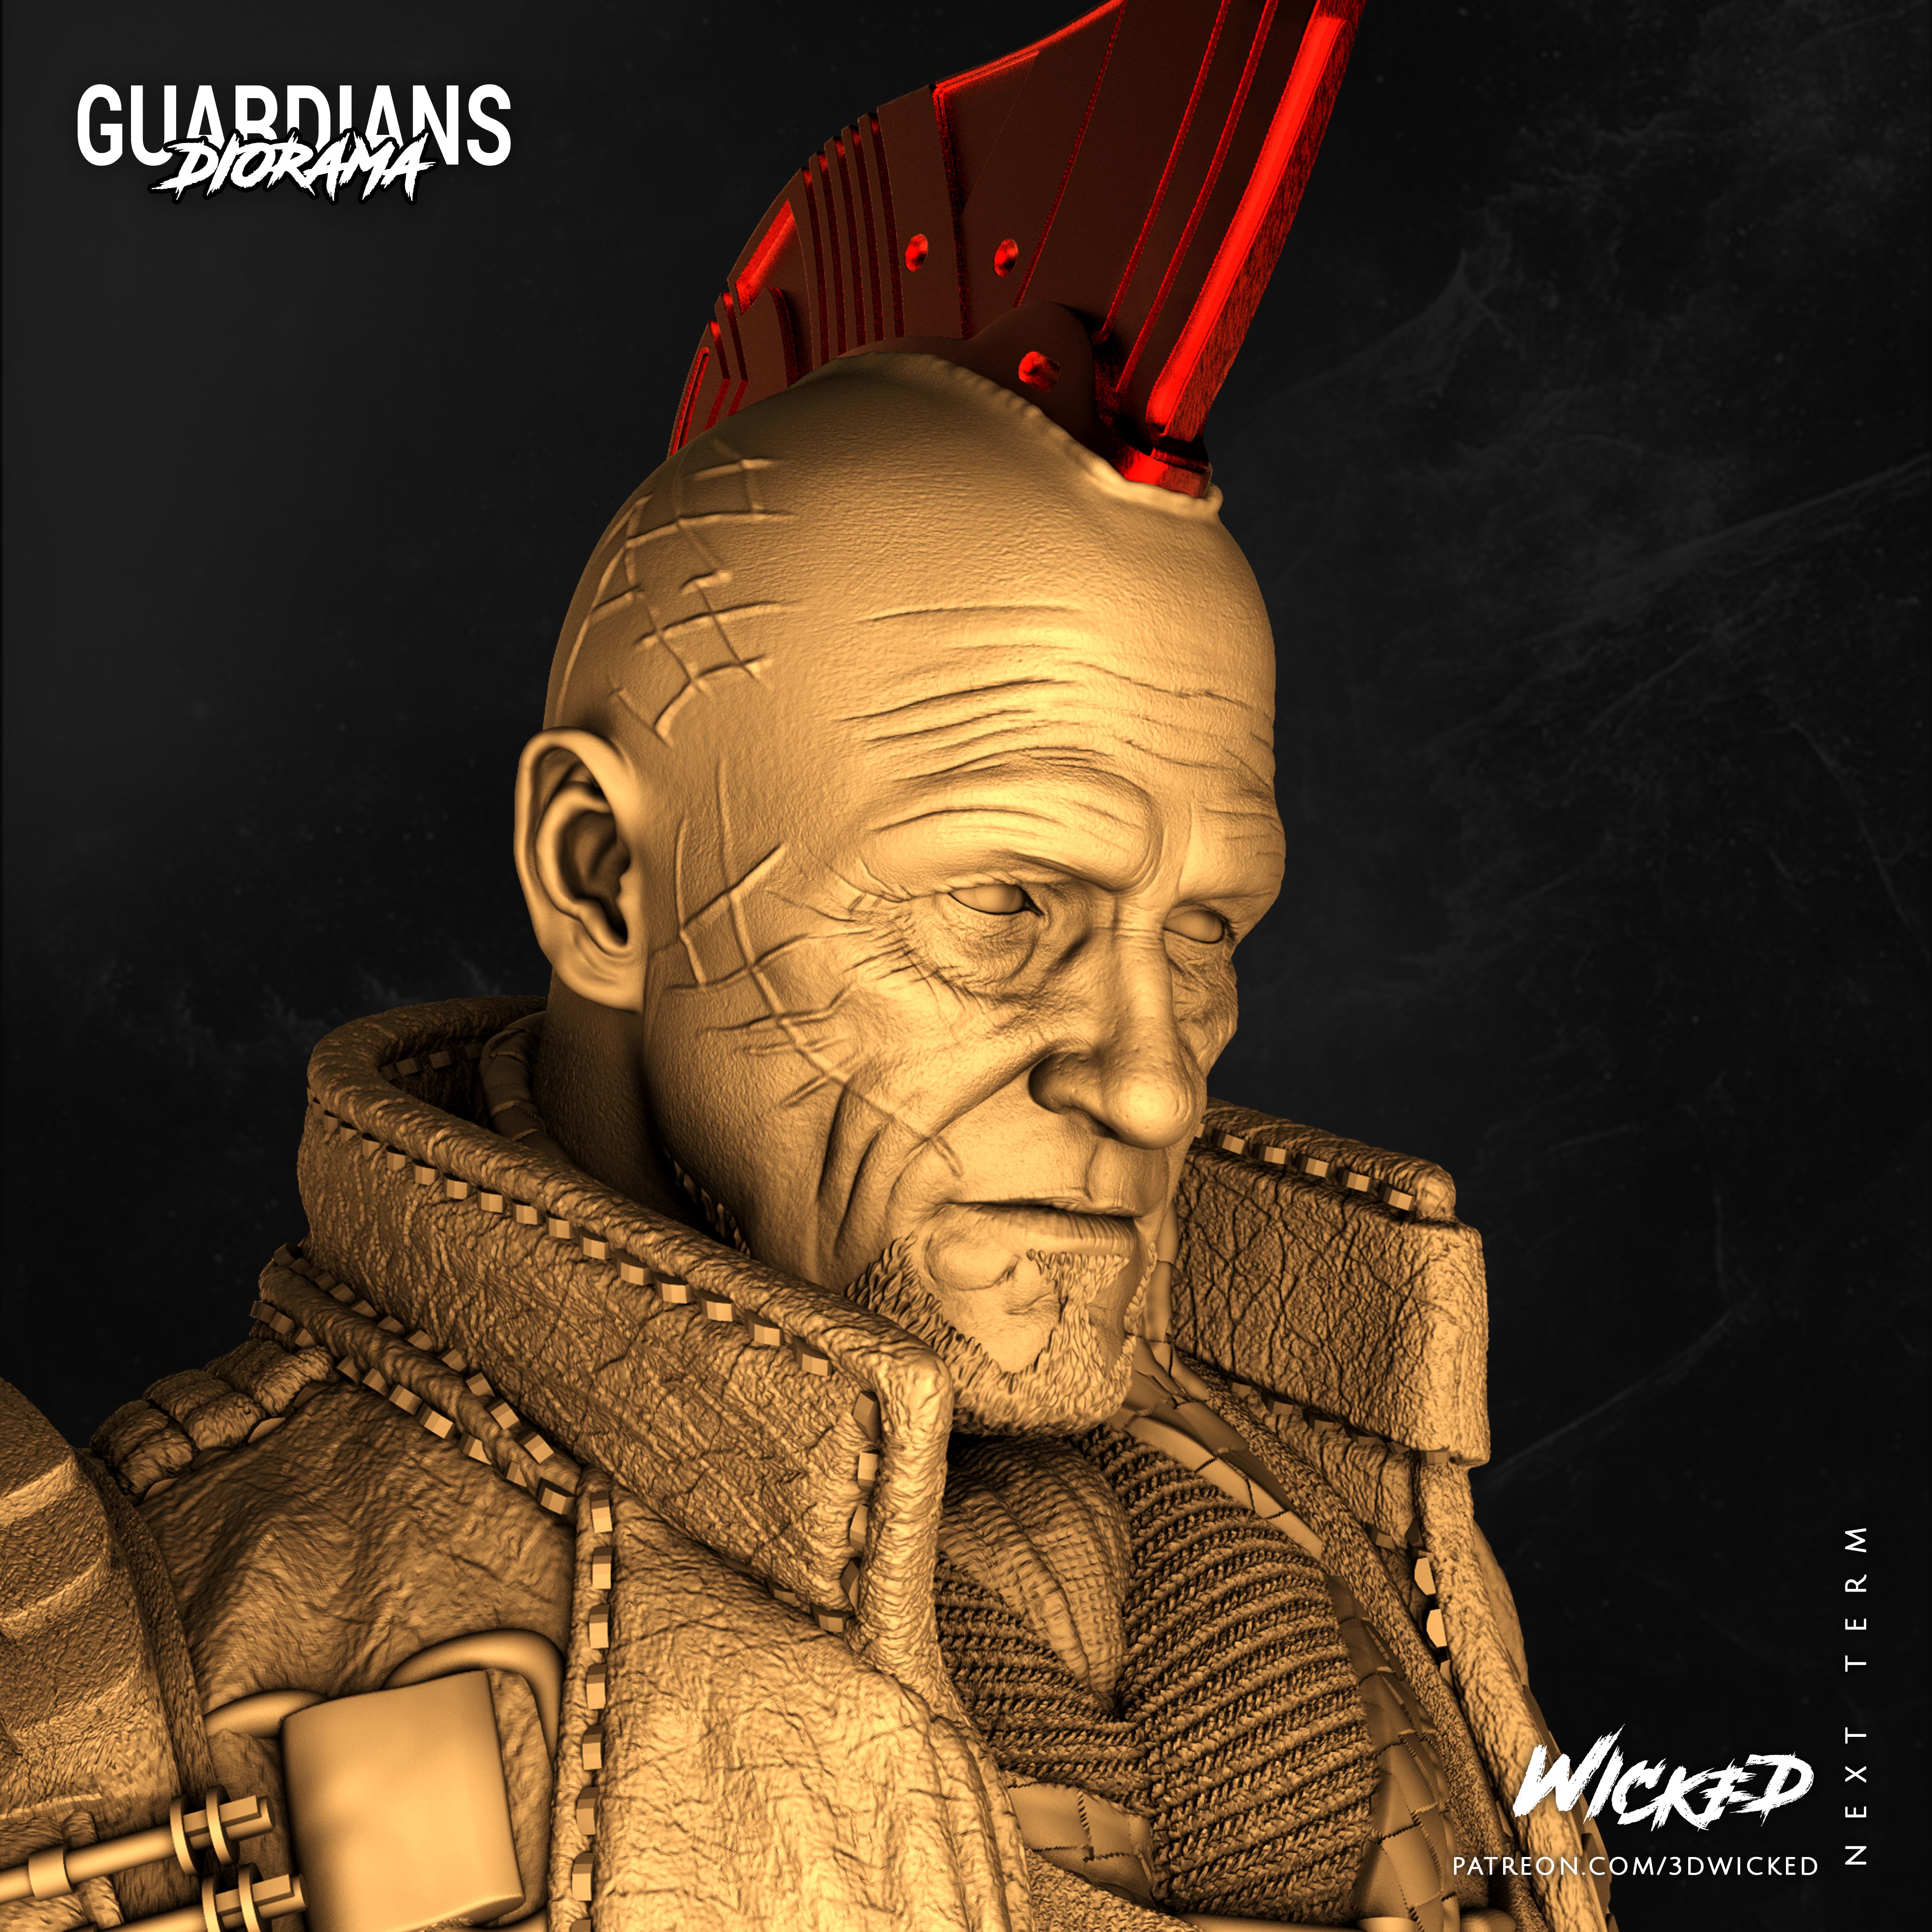 092621-Wicked-September-term-promo-016.jpg Download file Wicked Marvel Yondu Sculpture: Tested and ready for 3d printing • 3D printing template, Wicked